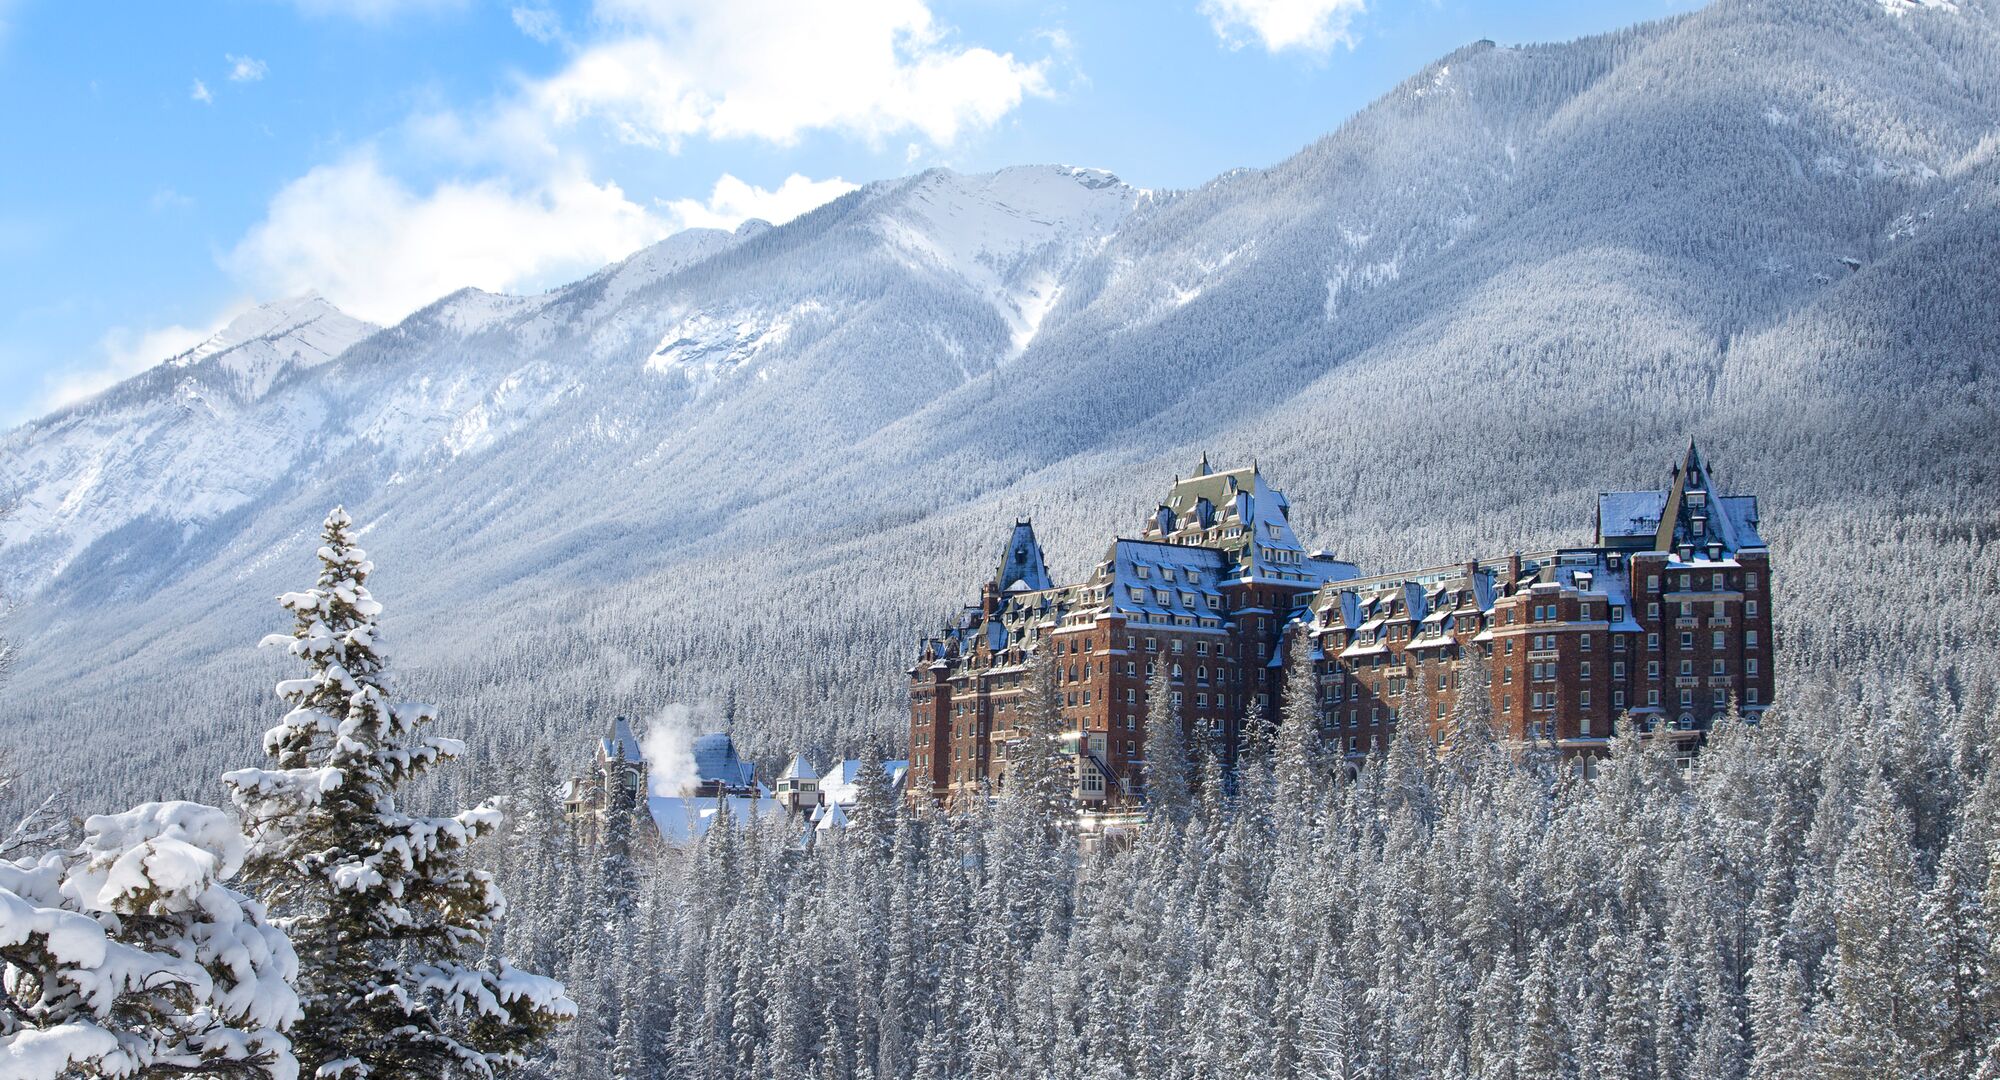 Fairmont Banff Springs - the Castle of the Rockies towering above the snowy forest on a crisp winter day in Banff National Park. 